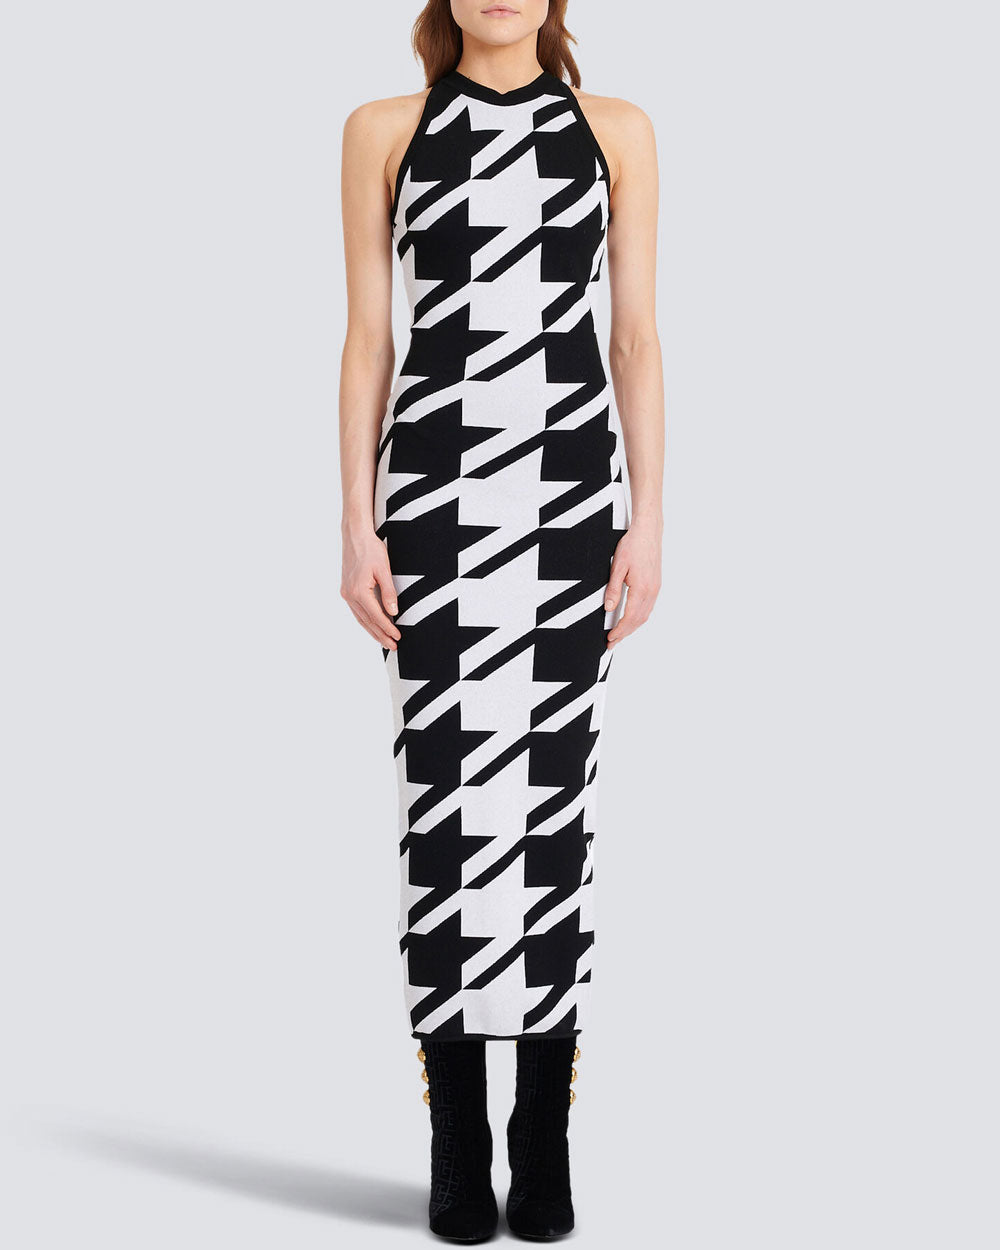 Noir and Blanc Houndstooth Knit Midi Dress